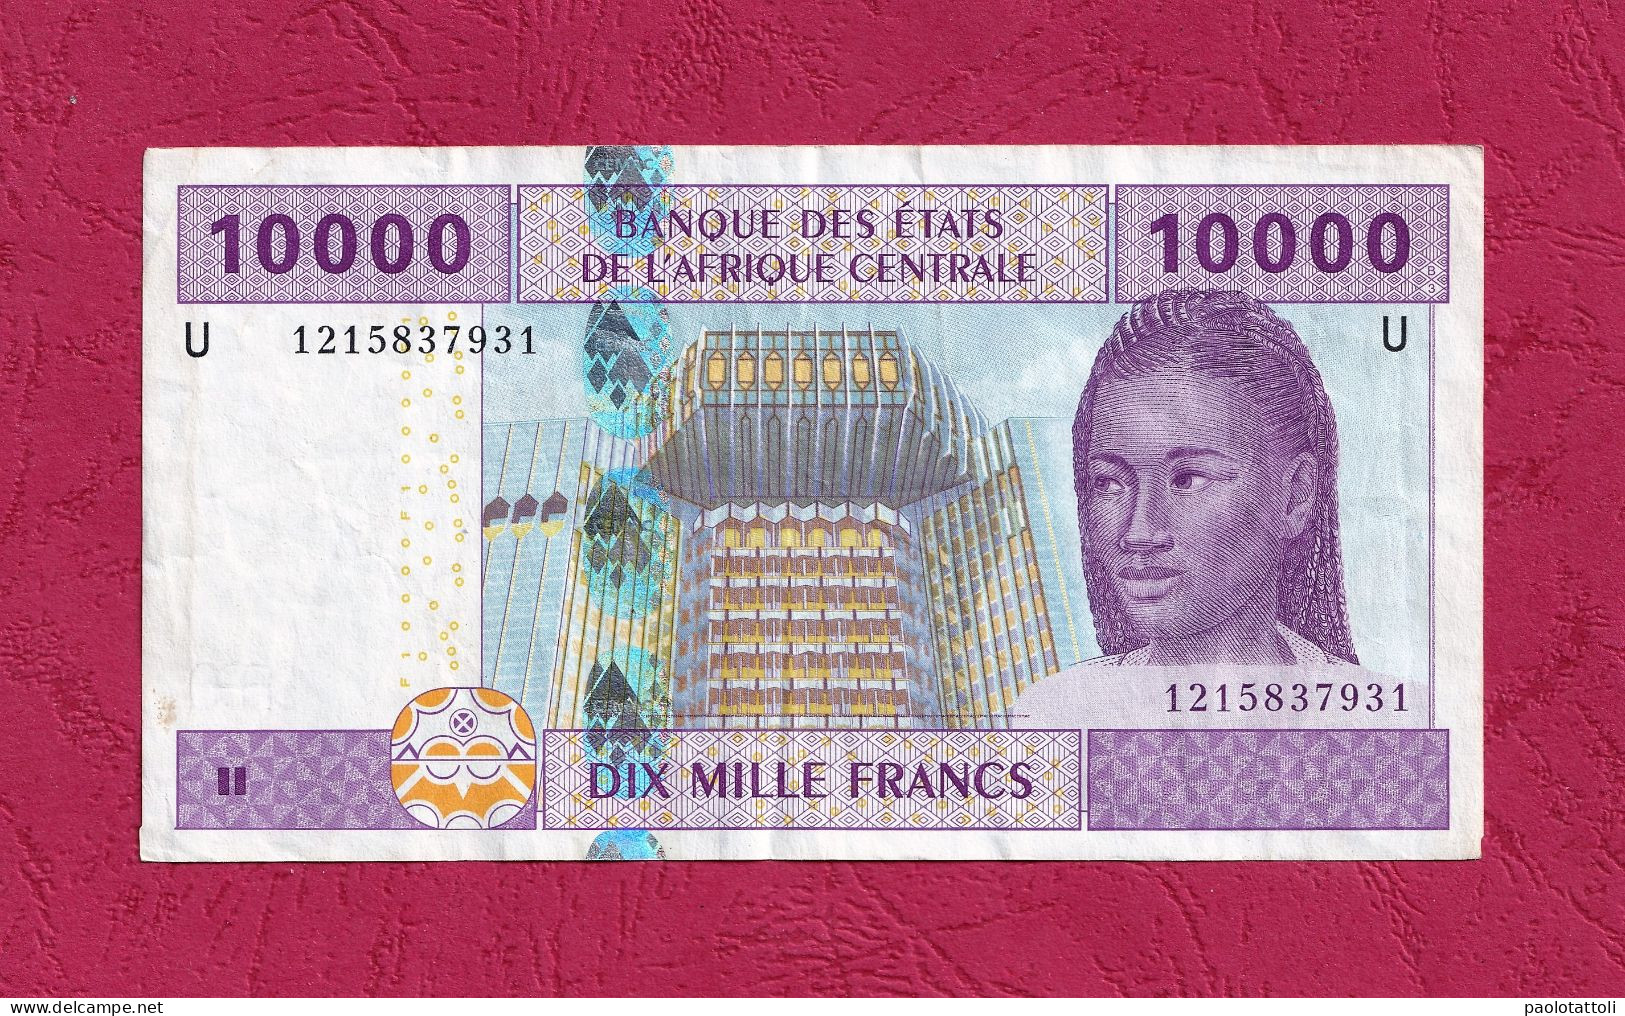 Cameroun, 2002- 10000 Francs. Obverse Portrait Of A Young Braided Woman. Reverse Transport And Communication. - Cameroun